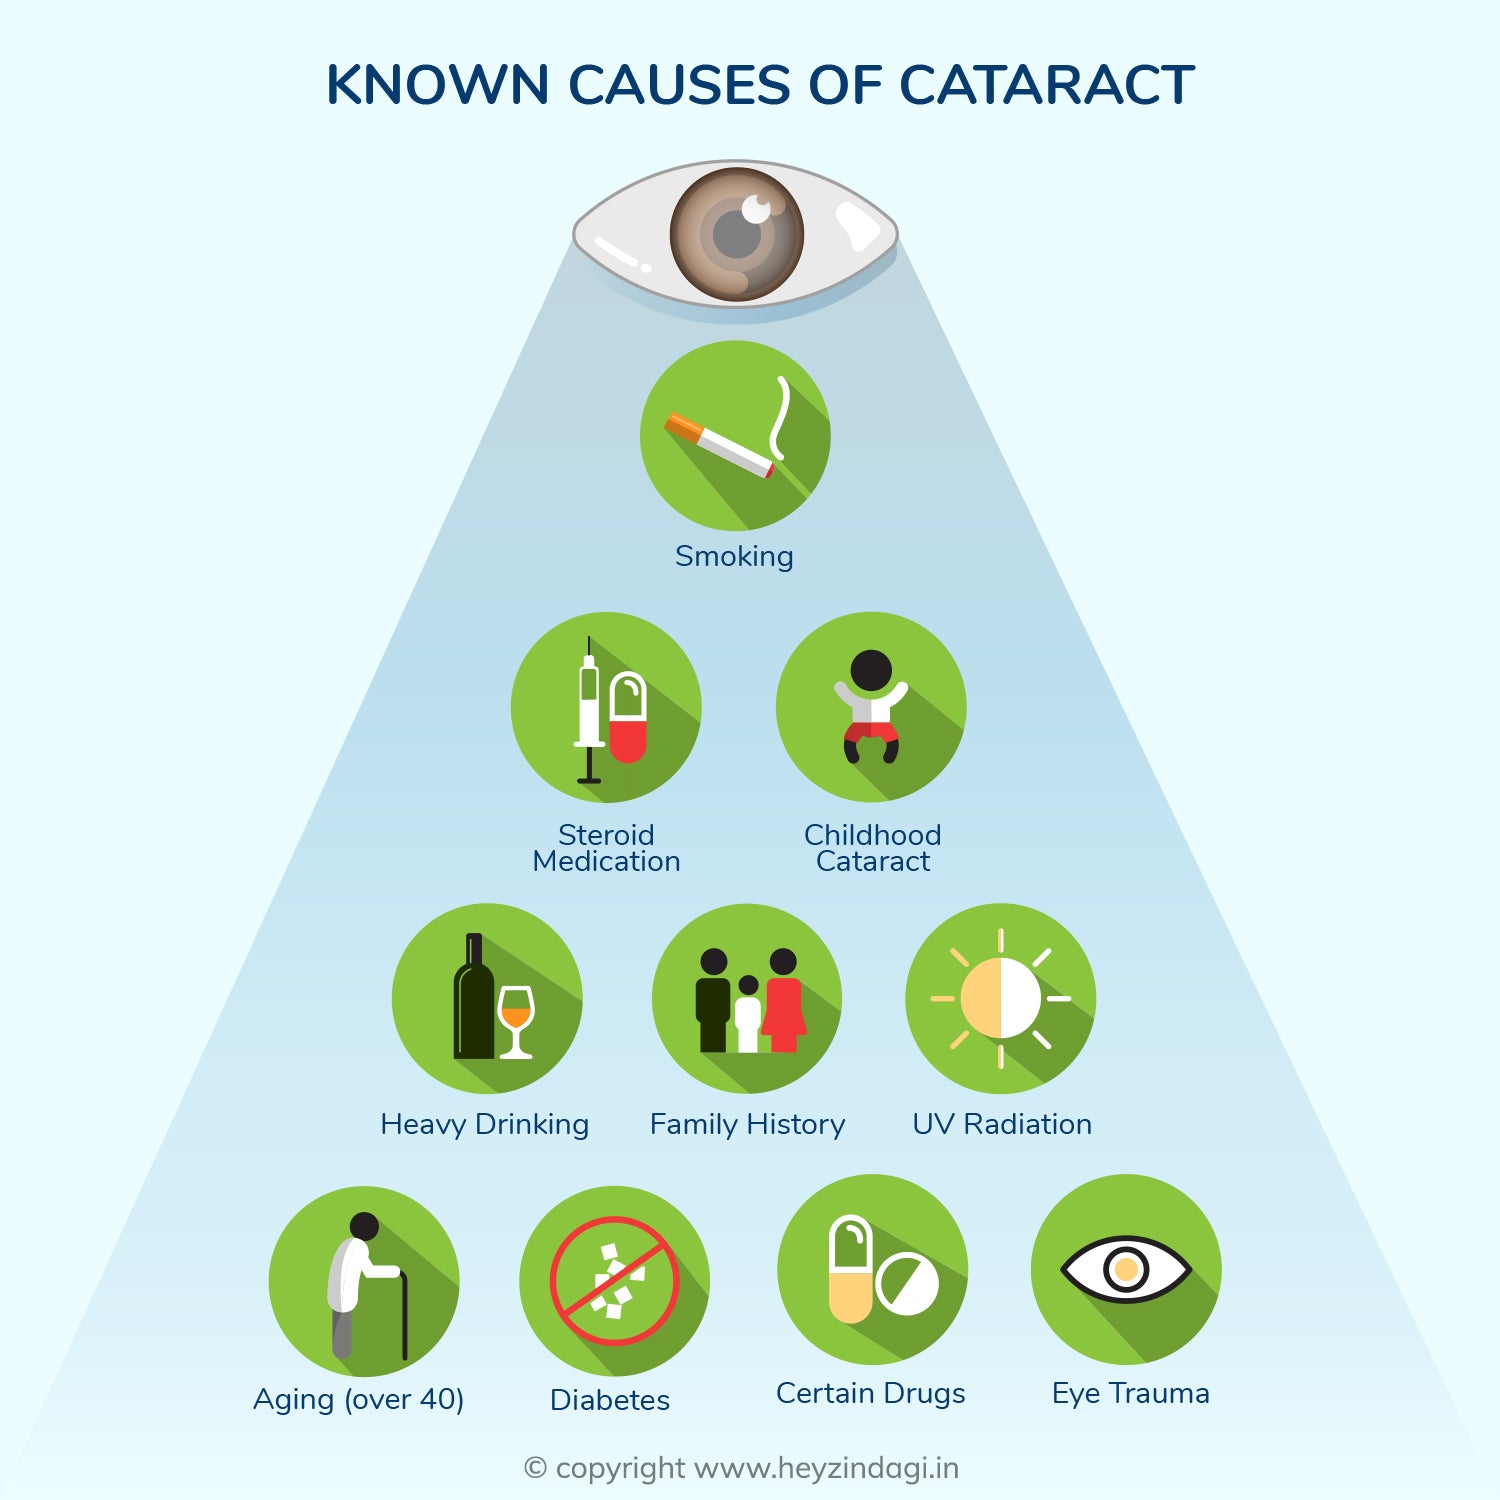 alt="hey zindagi dr. know blog known causes of cataract infographic, old woman, no sugar, steroids, smoking, UV radiation, family history, wine bottle with glass, medicine, eye , child"